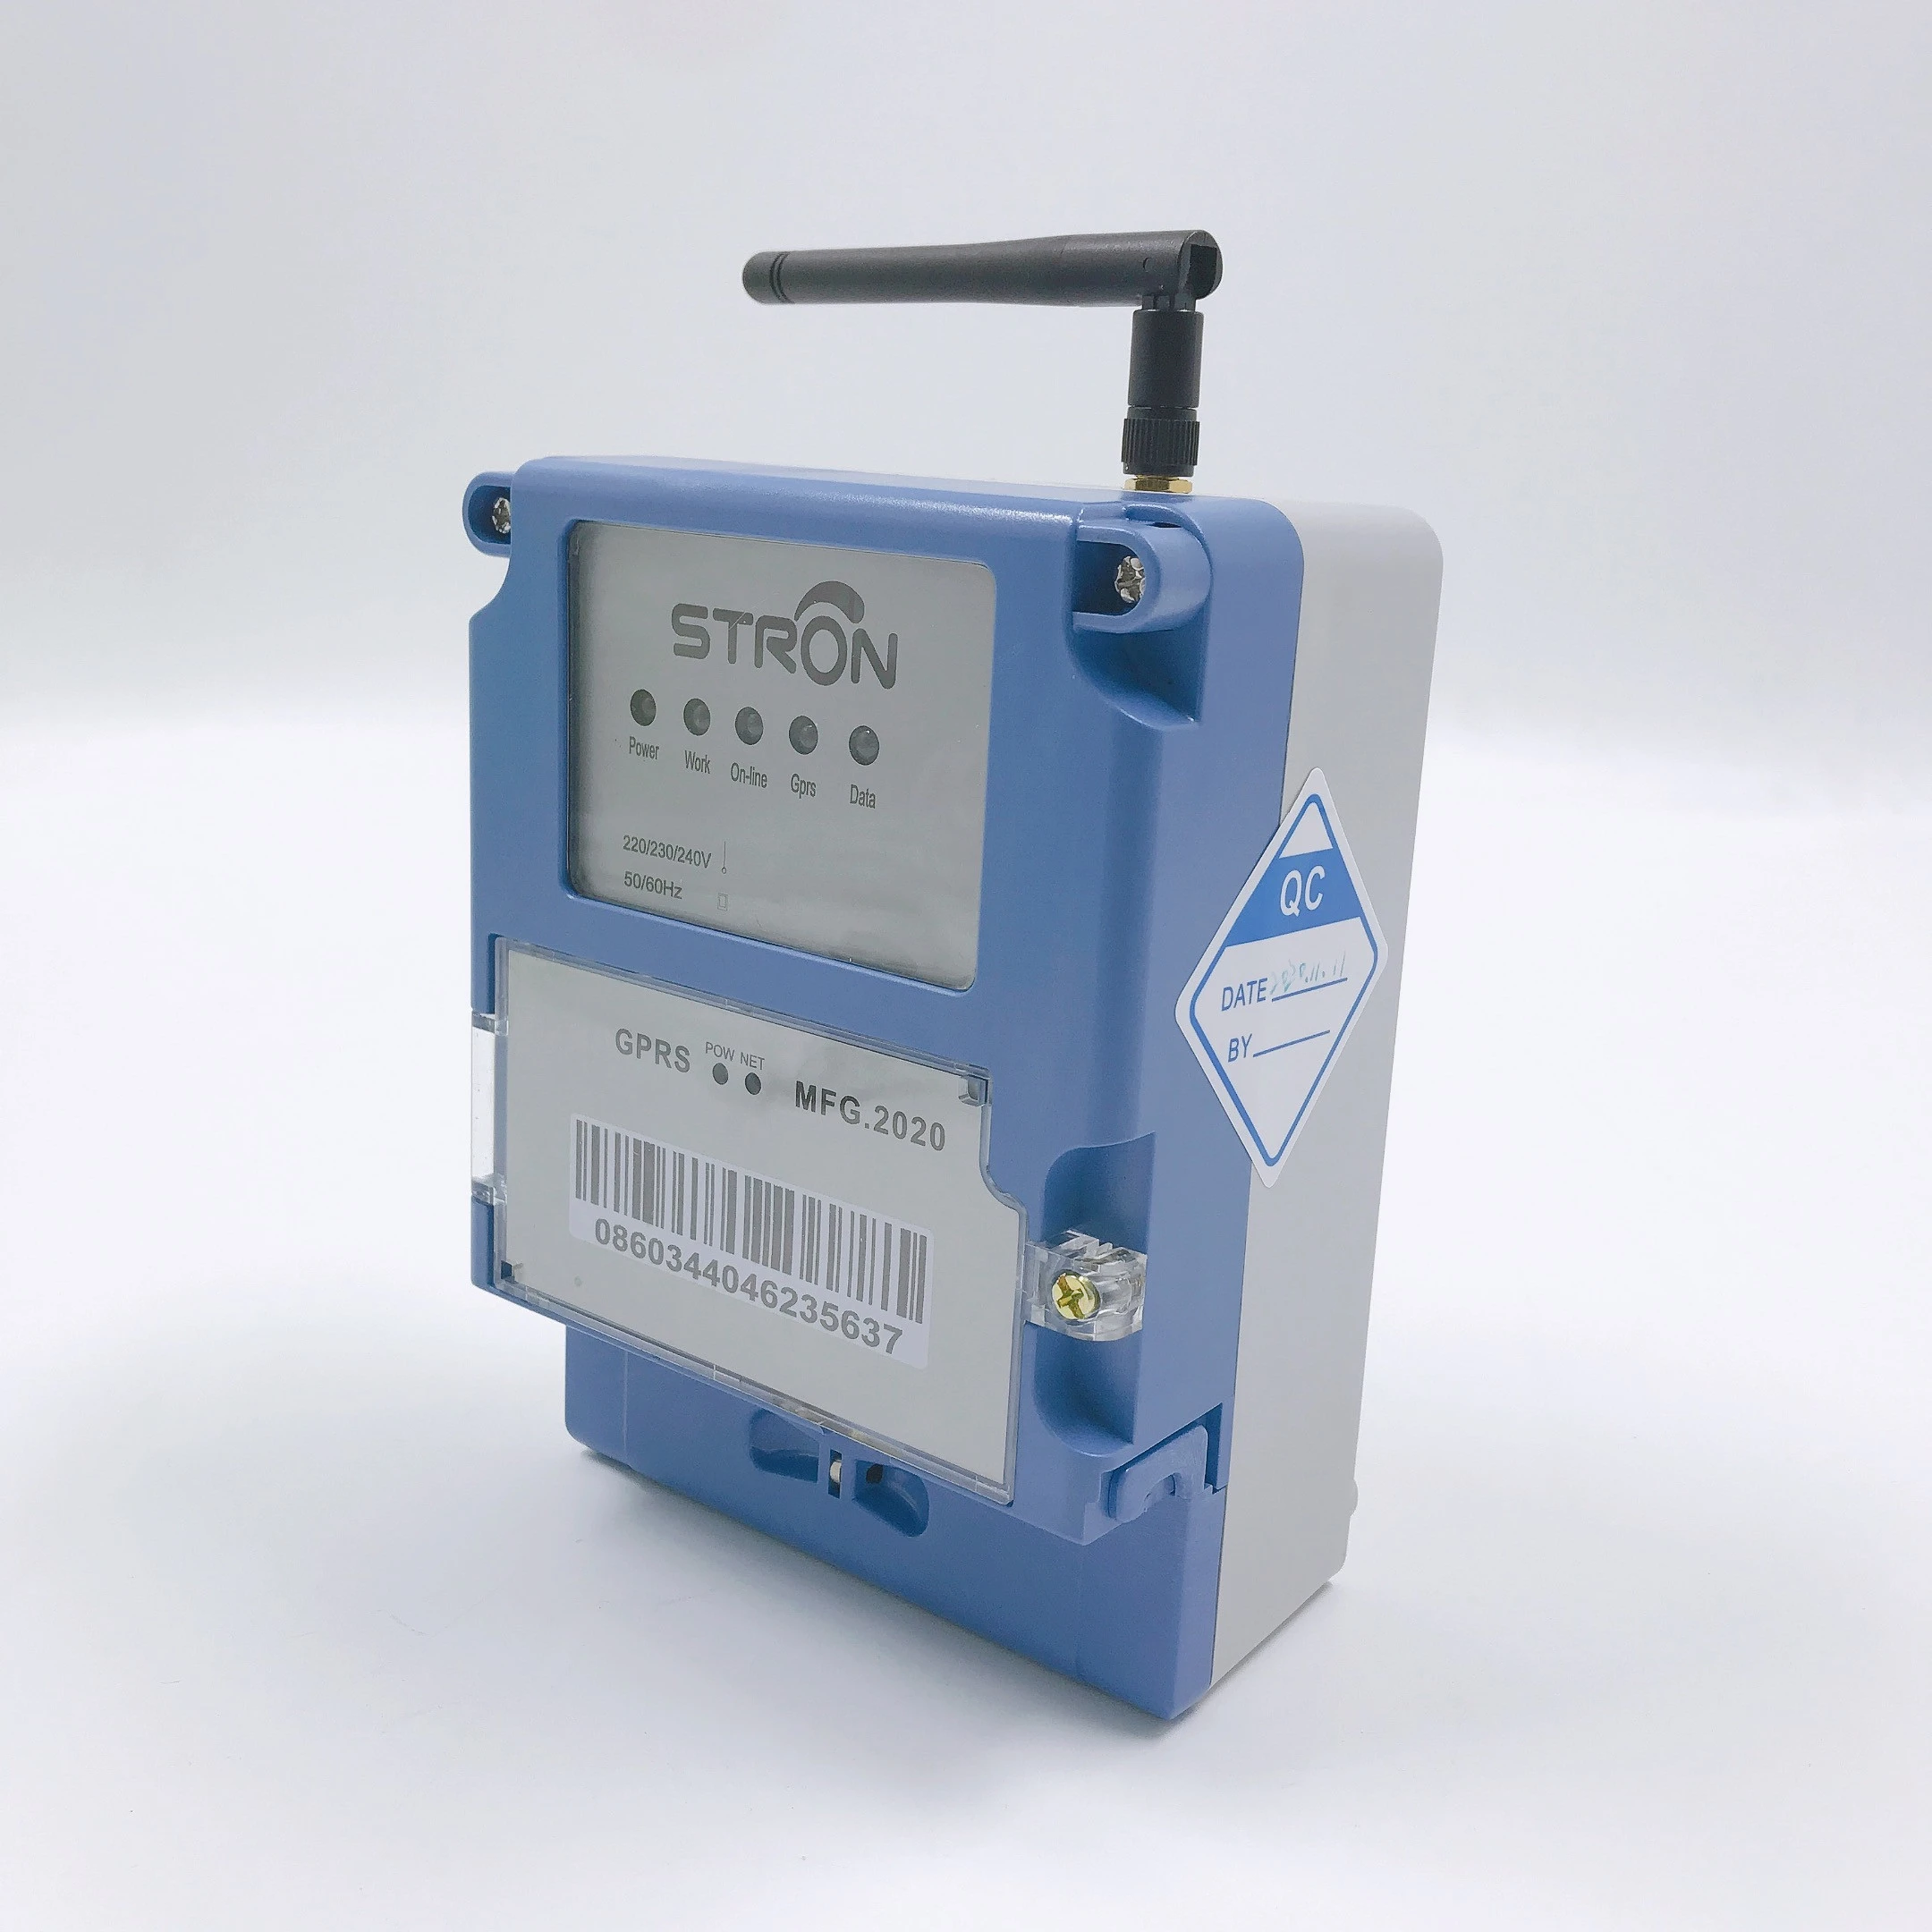 Smart Data Concentrate Unit(DCU) For Reading and Controlling Smart meters like Electricity, Water Meter Remotely Via AMI system